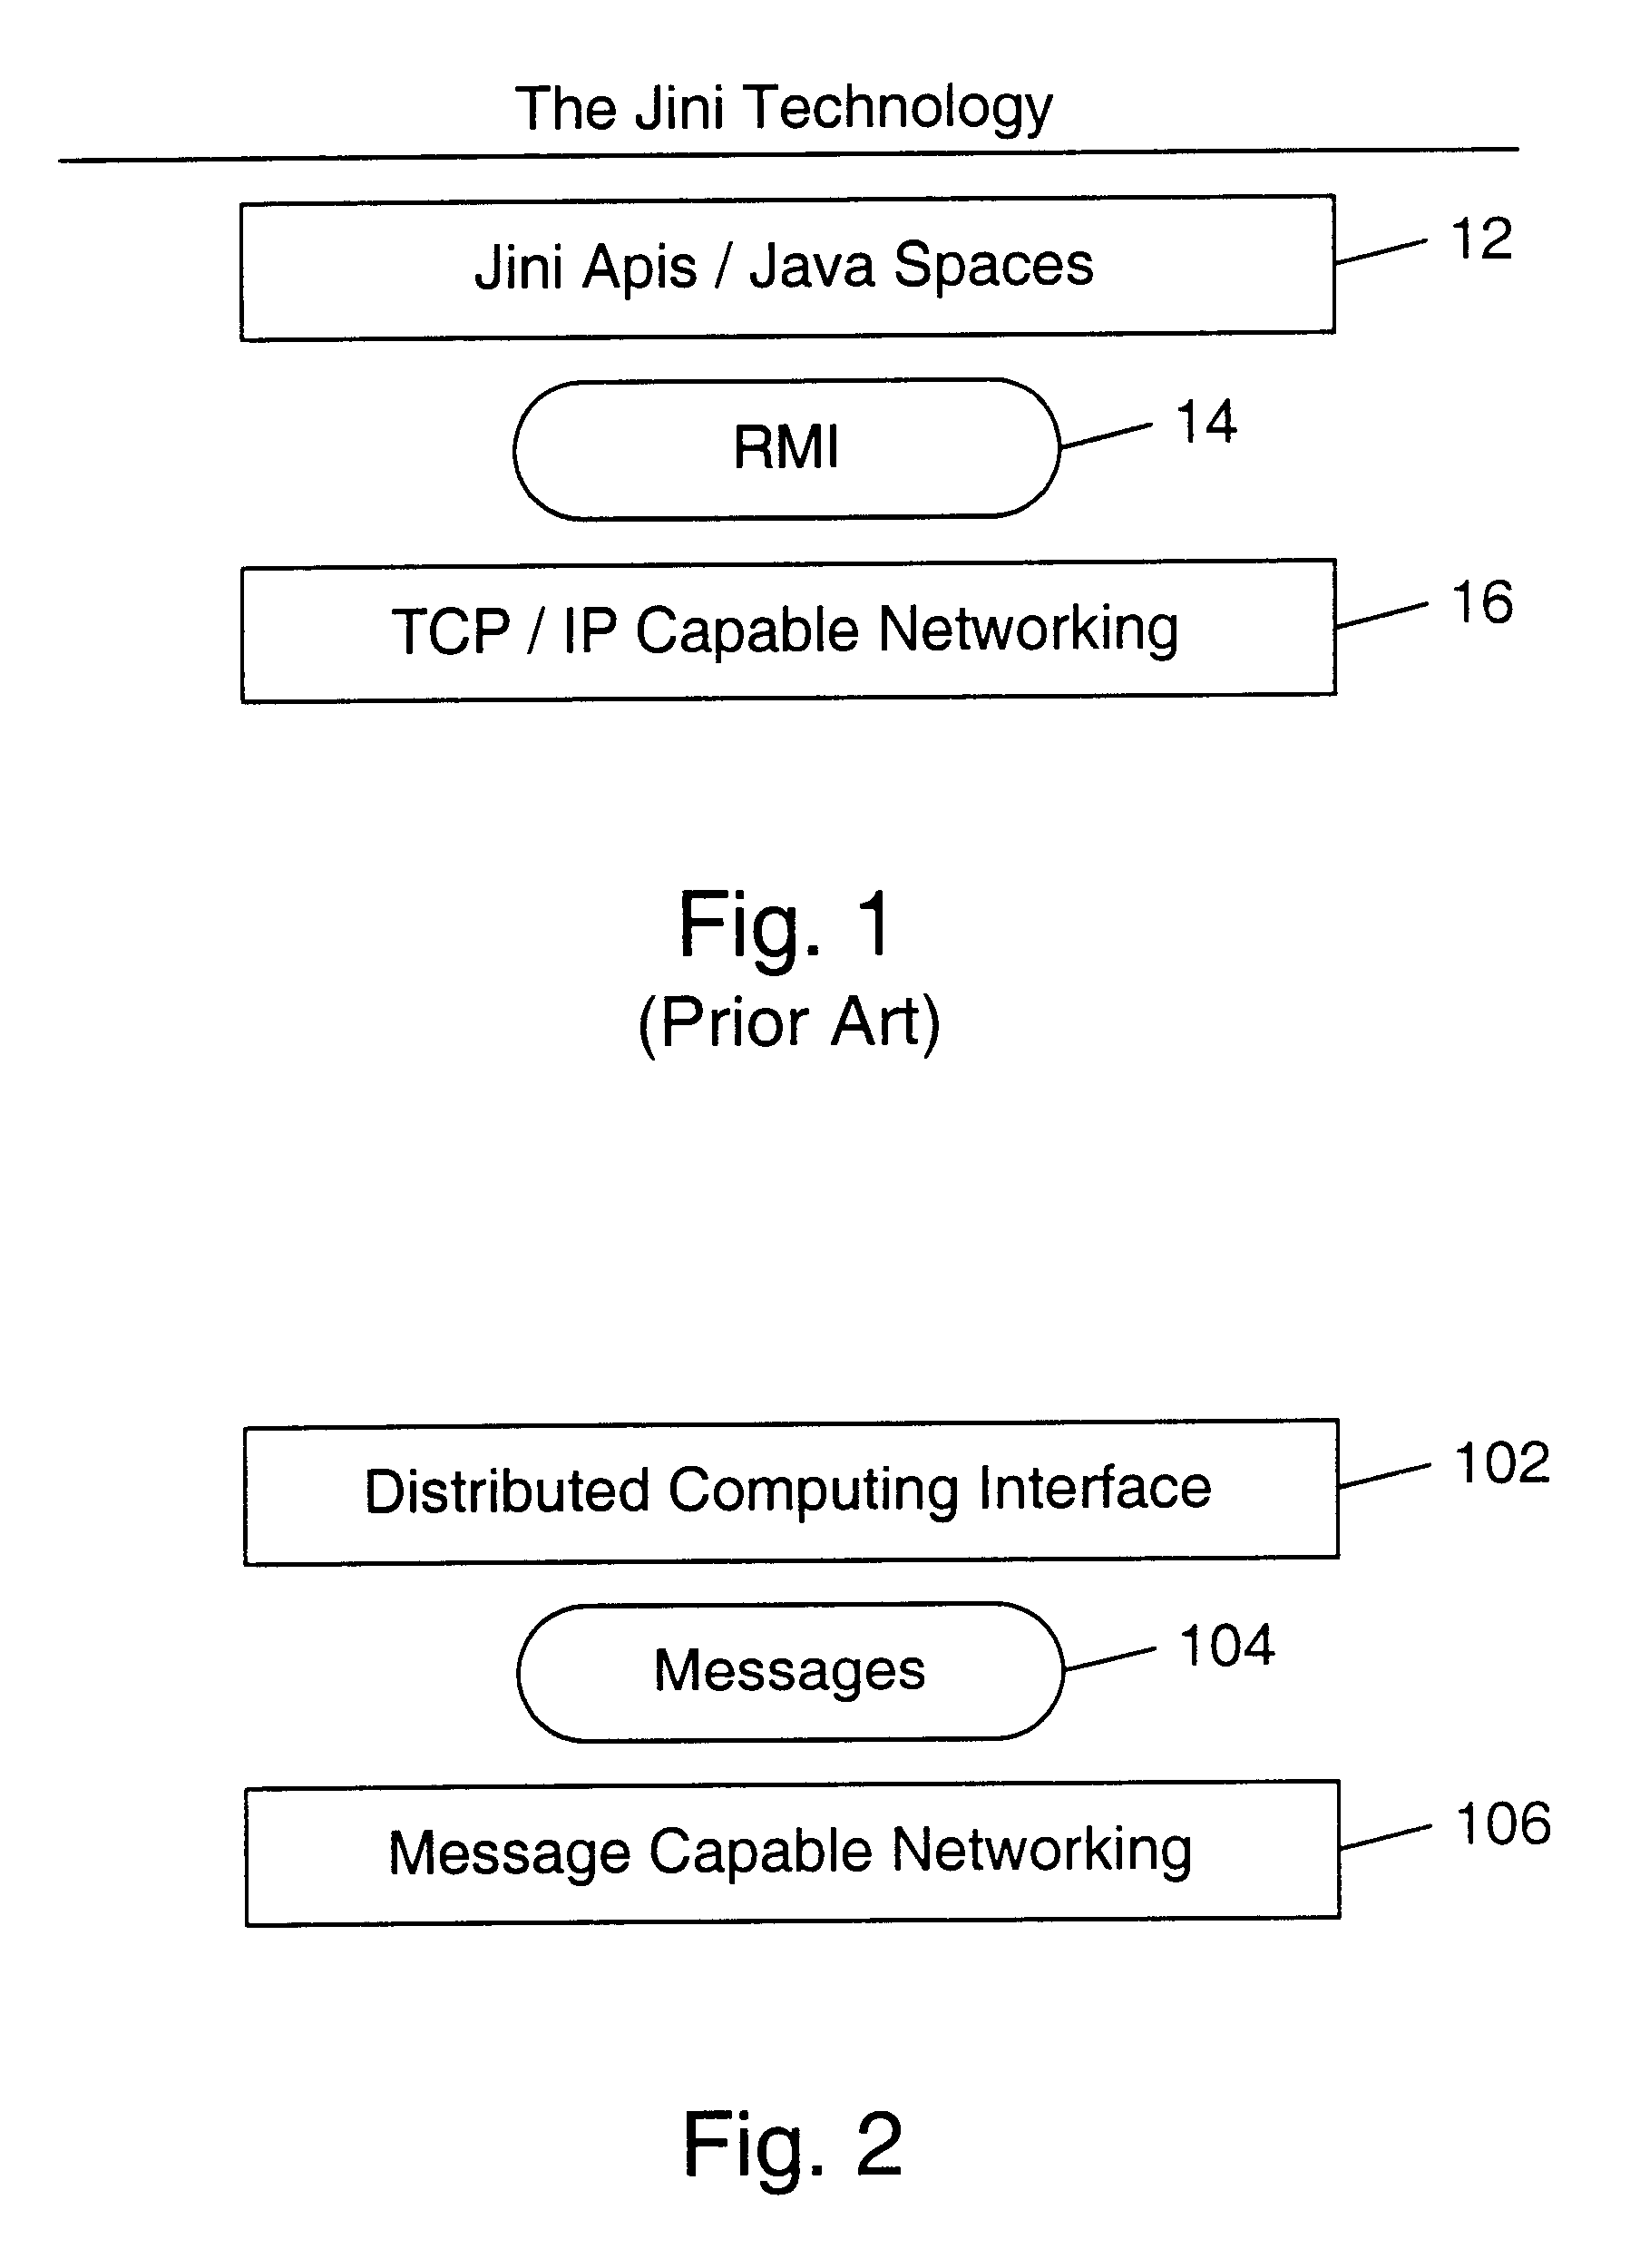 Addressing message gates in a distributed computing environment